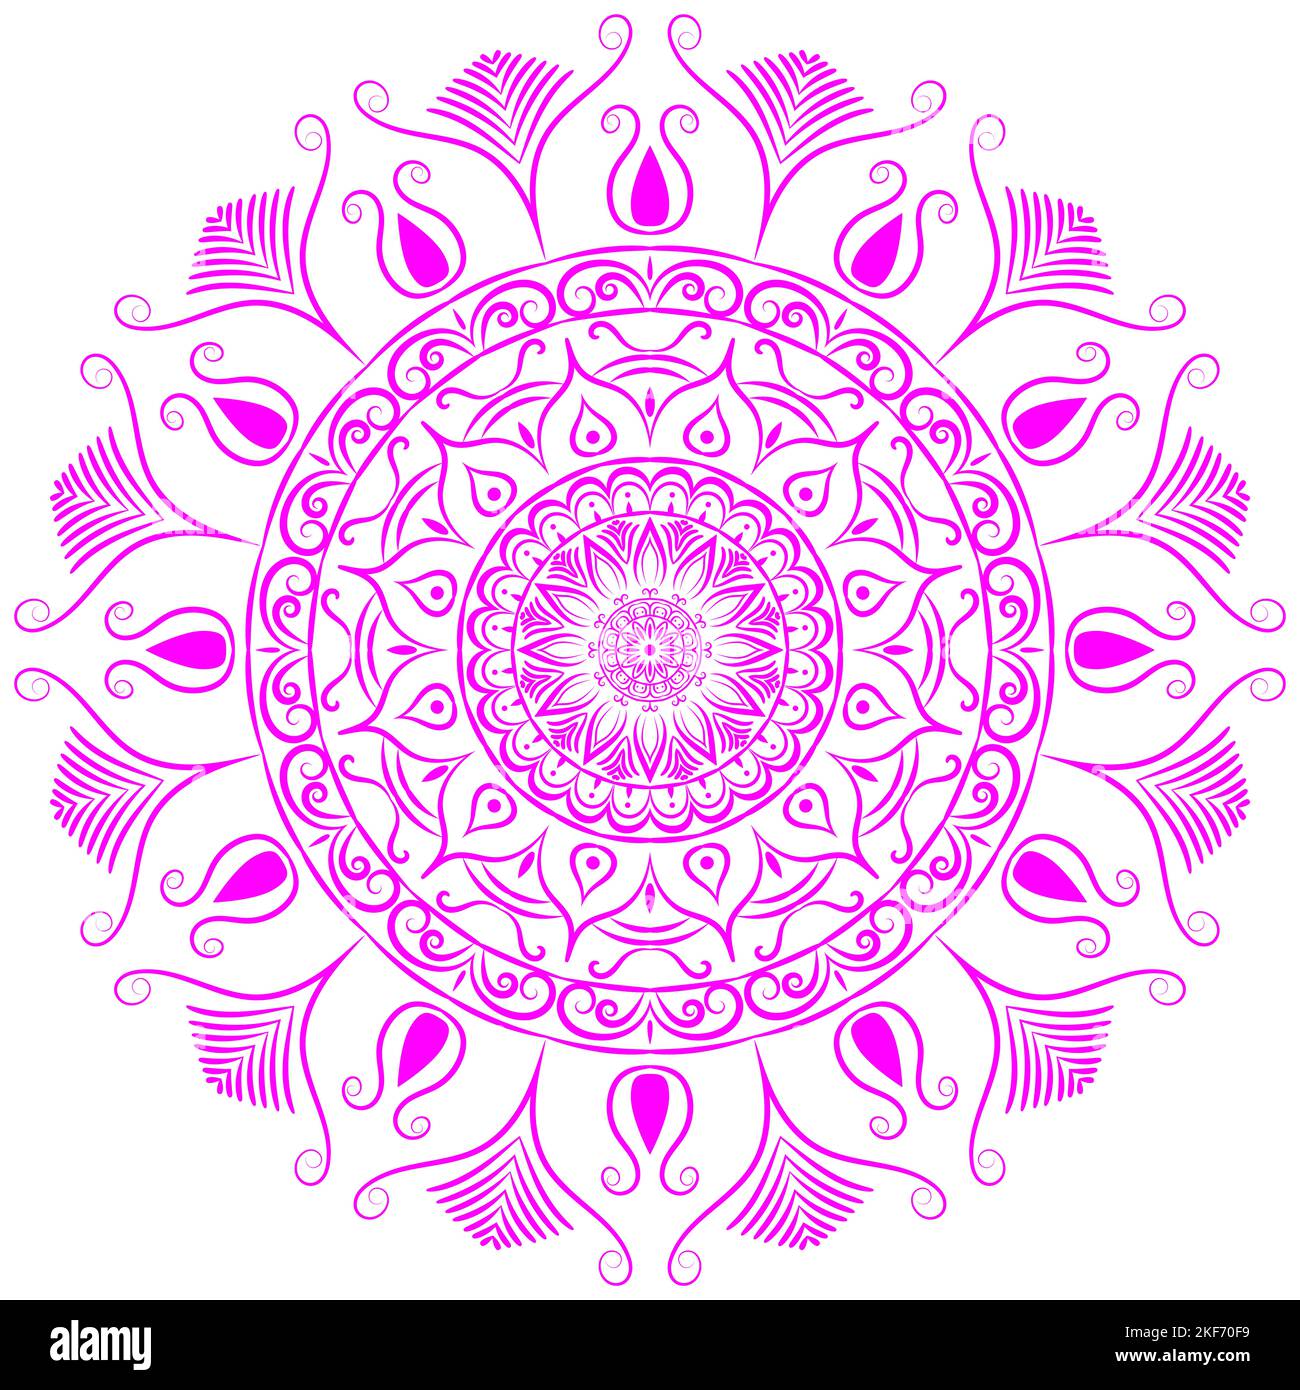 Pink color mandala art isolated on a white background, decoration elements for meditation poster, adult coloring book page, henna, tattoo art, mandala Stock Photo